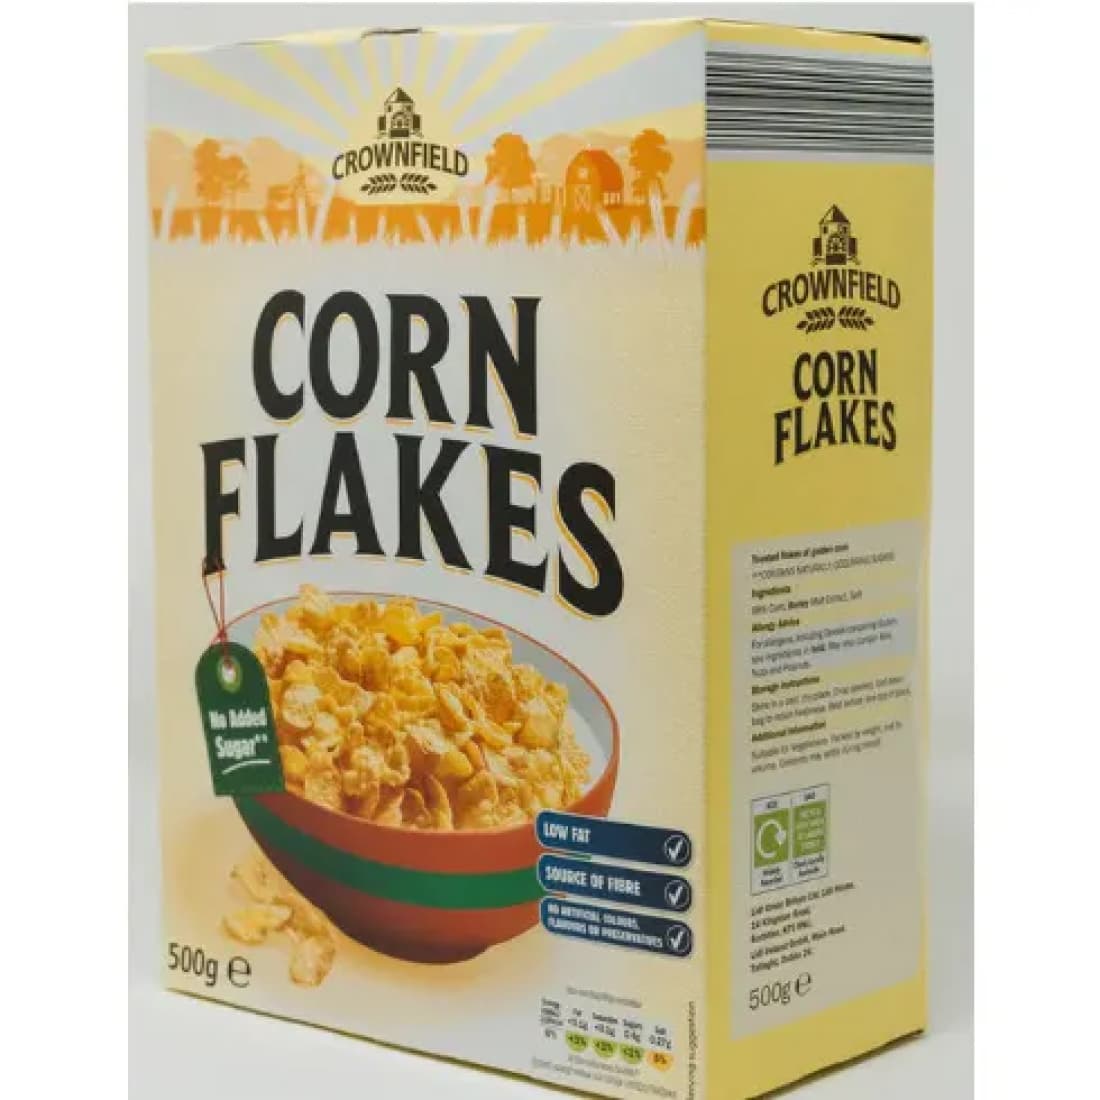 Crownfield cornflakes 500g pack of 8 cartons